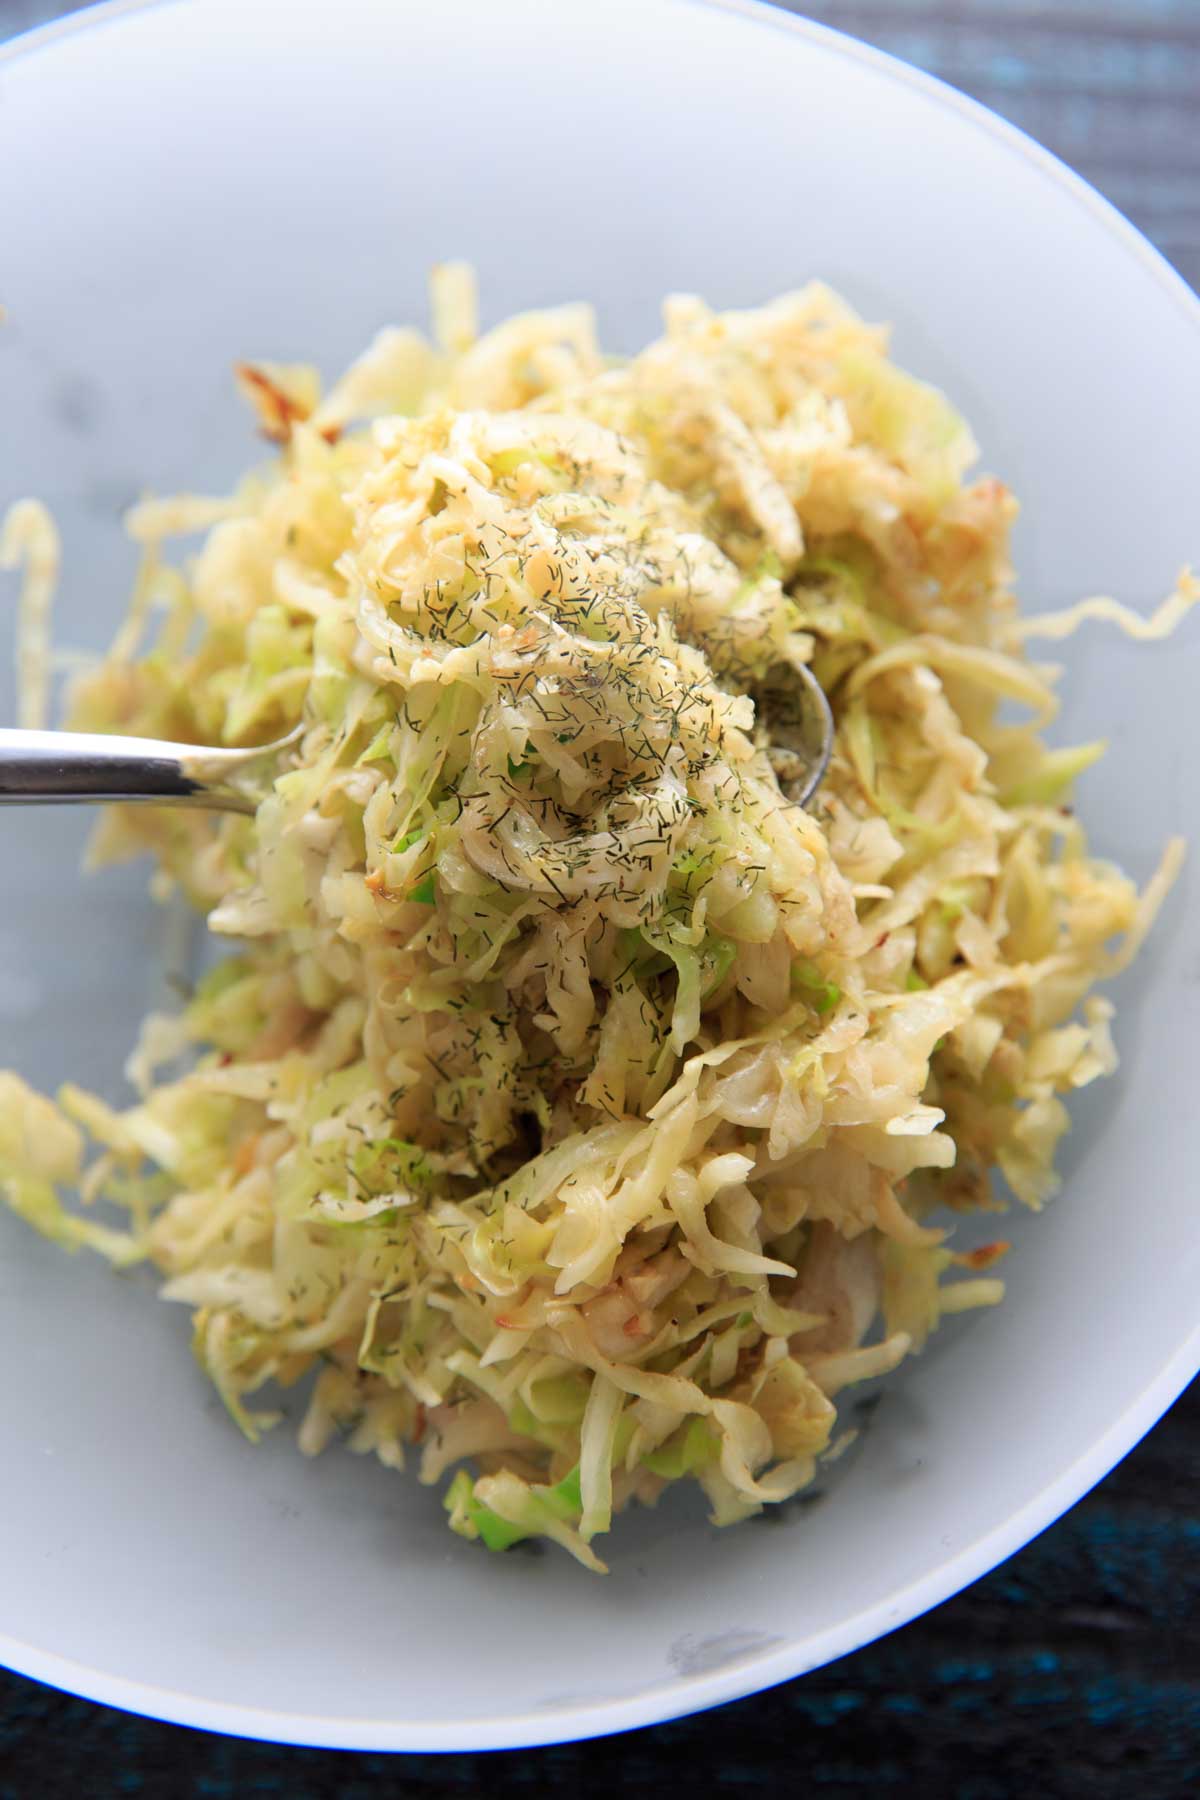 https://www.trialandeater.com/wp-content/uploads/2019/03/Sauteed-Cabbage-Recipe-Trial-and-Eater-5.jpg